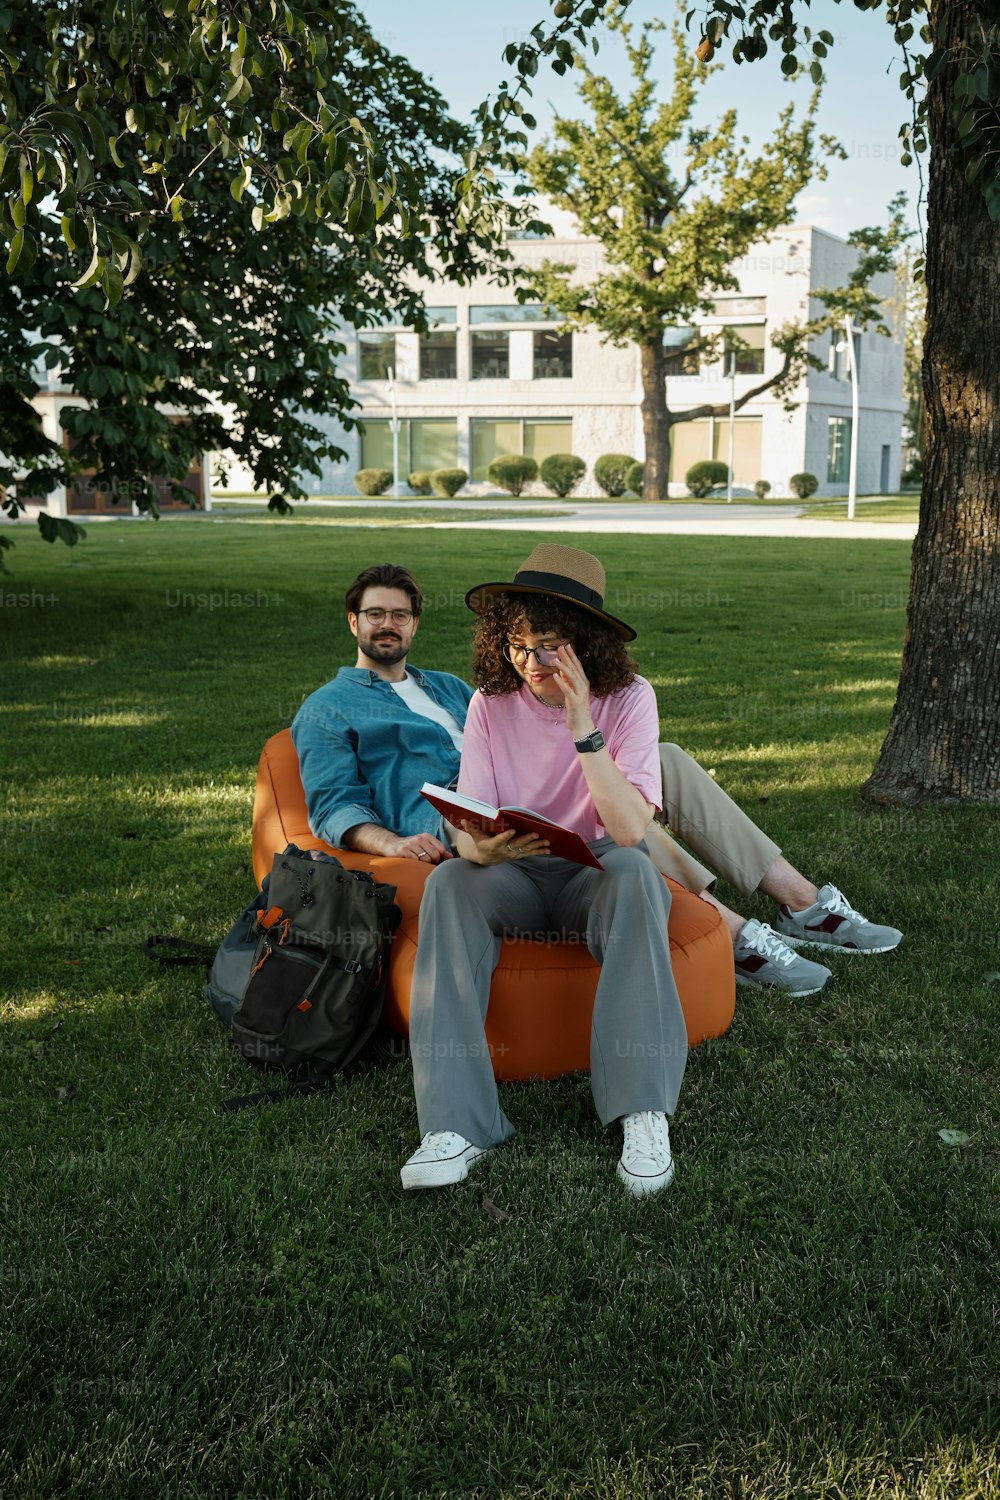 a man and woman sitting on an orange chair under a tree